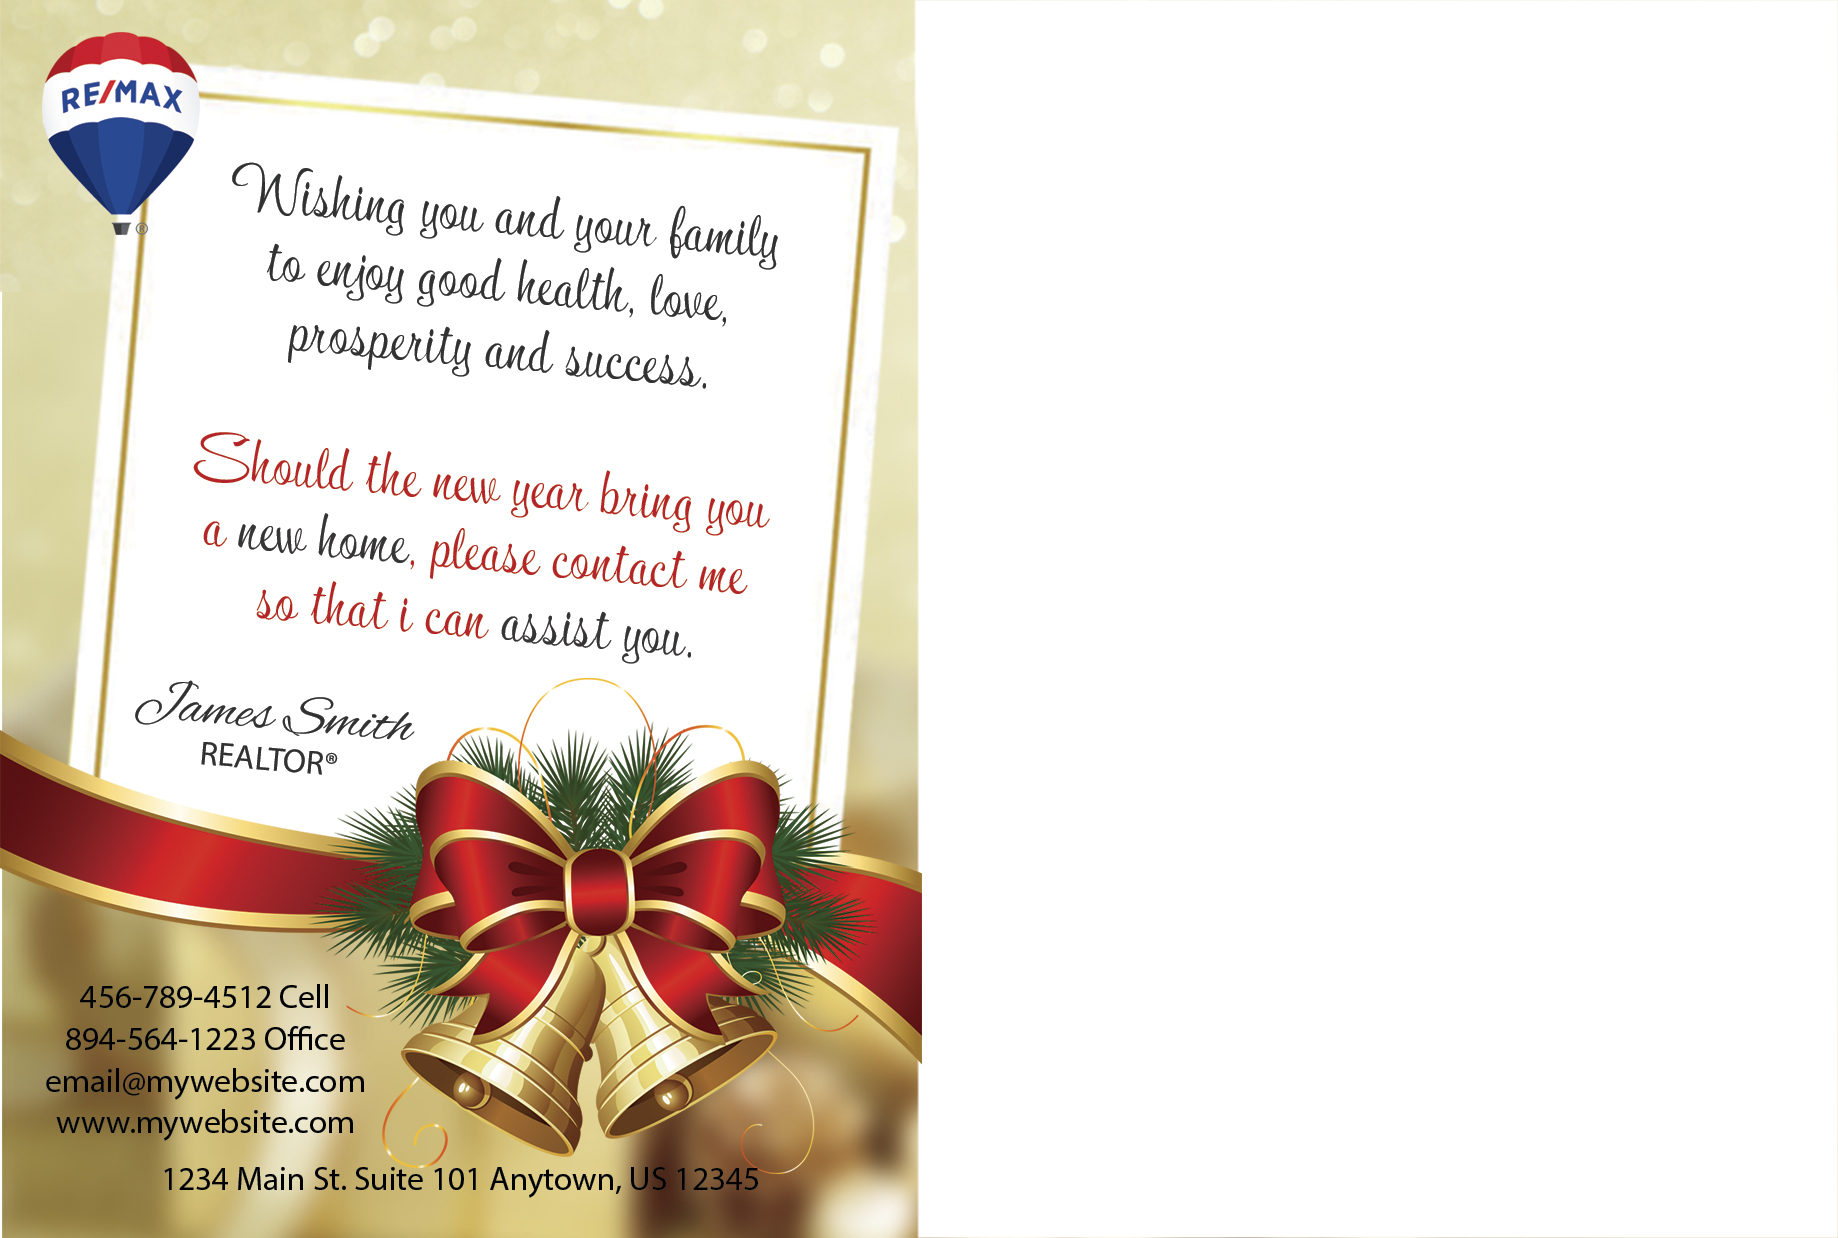 Remax Holiday Postcards, Remax Holiday Cards, Remax Realtor Holiday Cards, Remax Agent Holiday Cards, Remax Broker Holiday Cards, Remax Office Holiday Cards